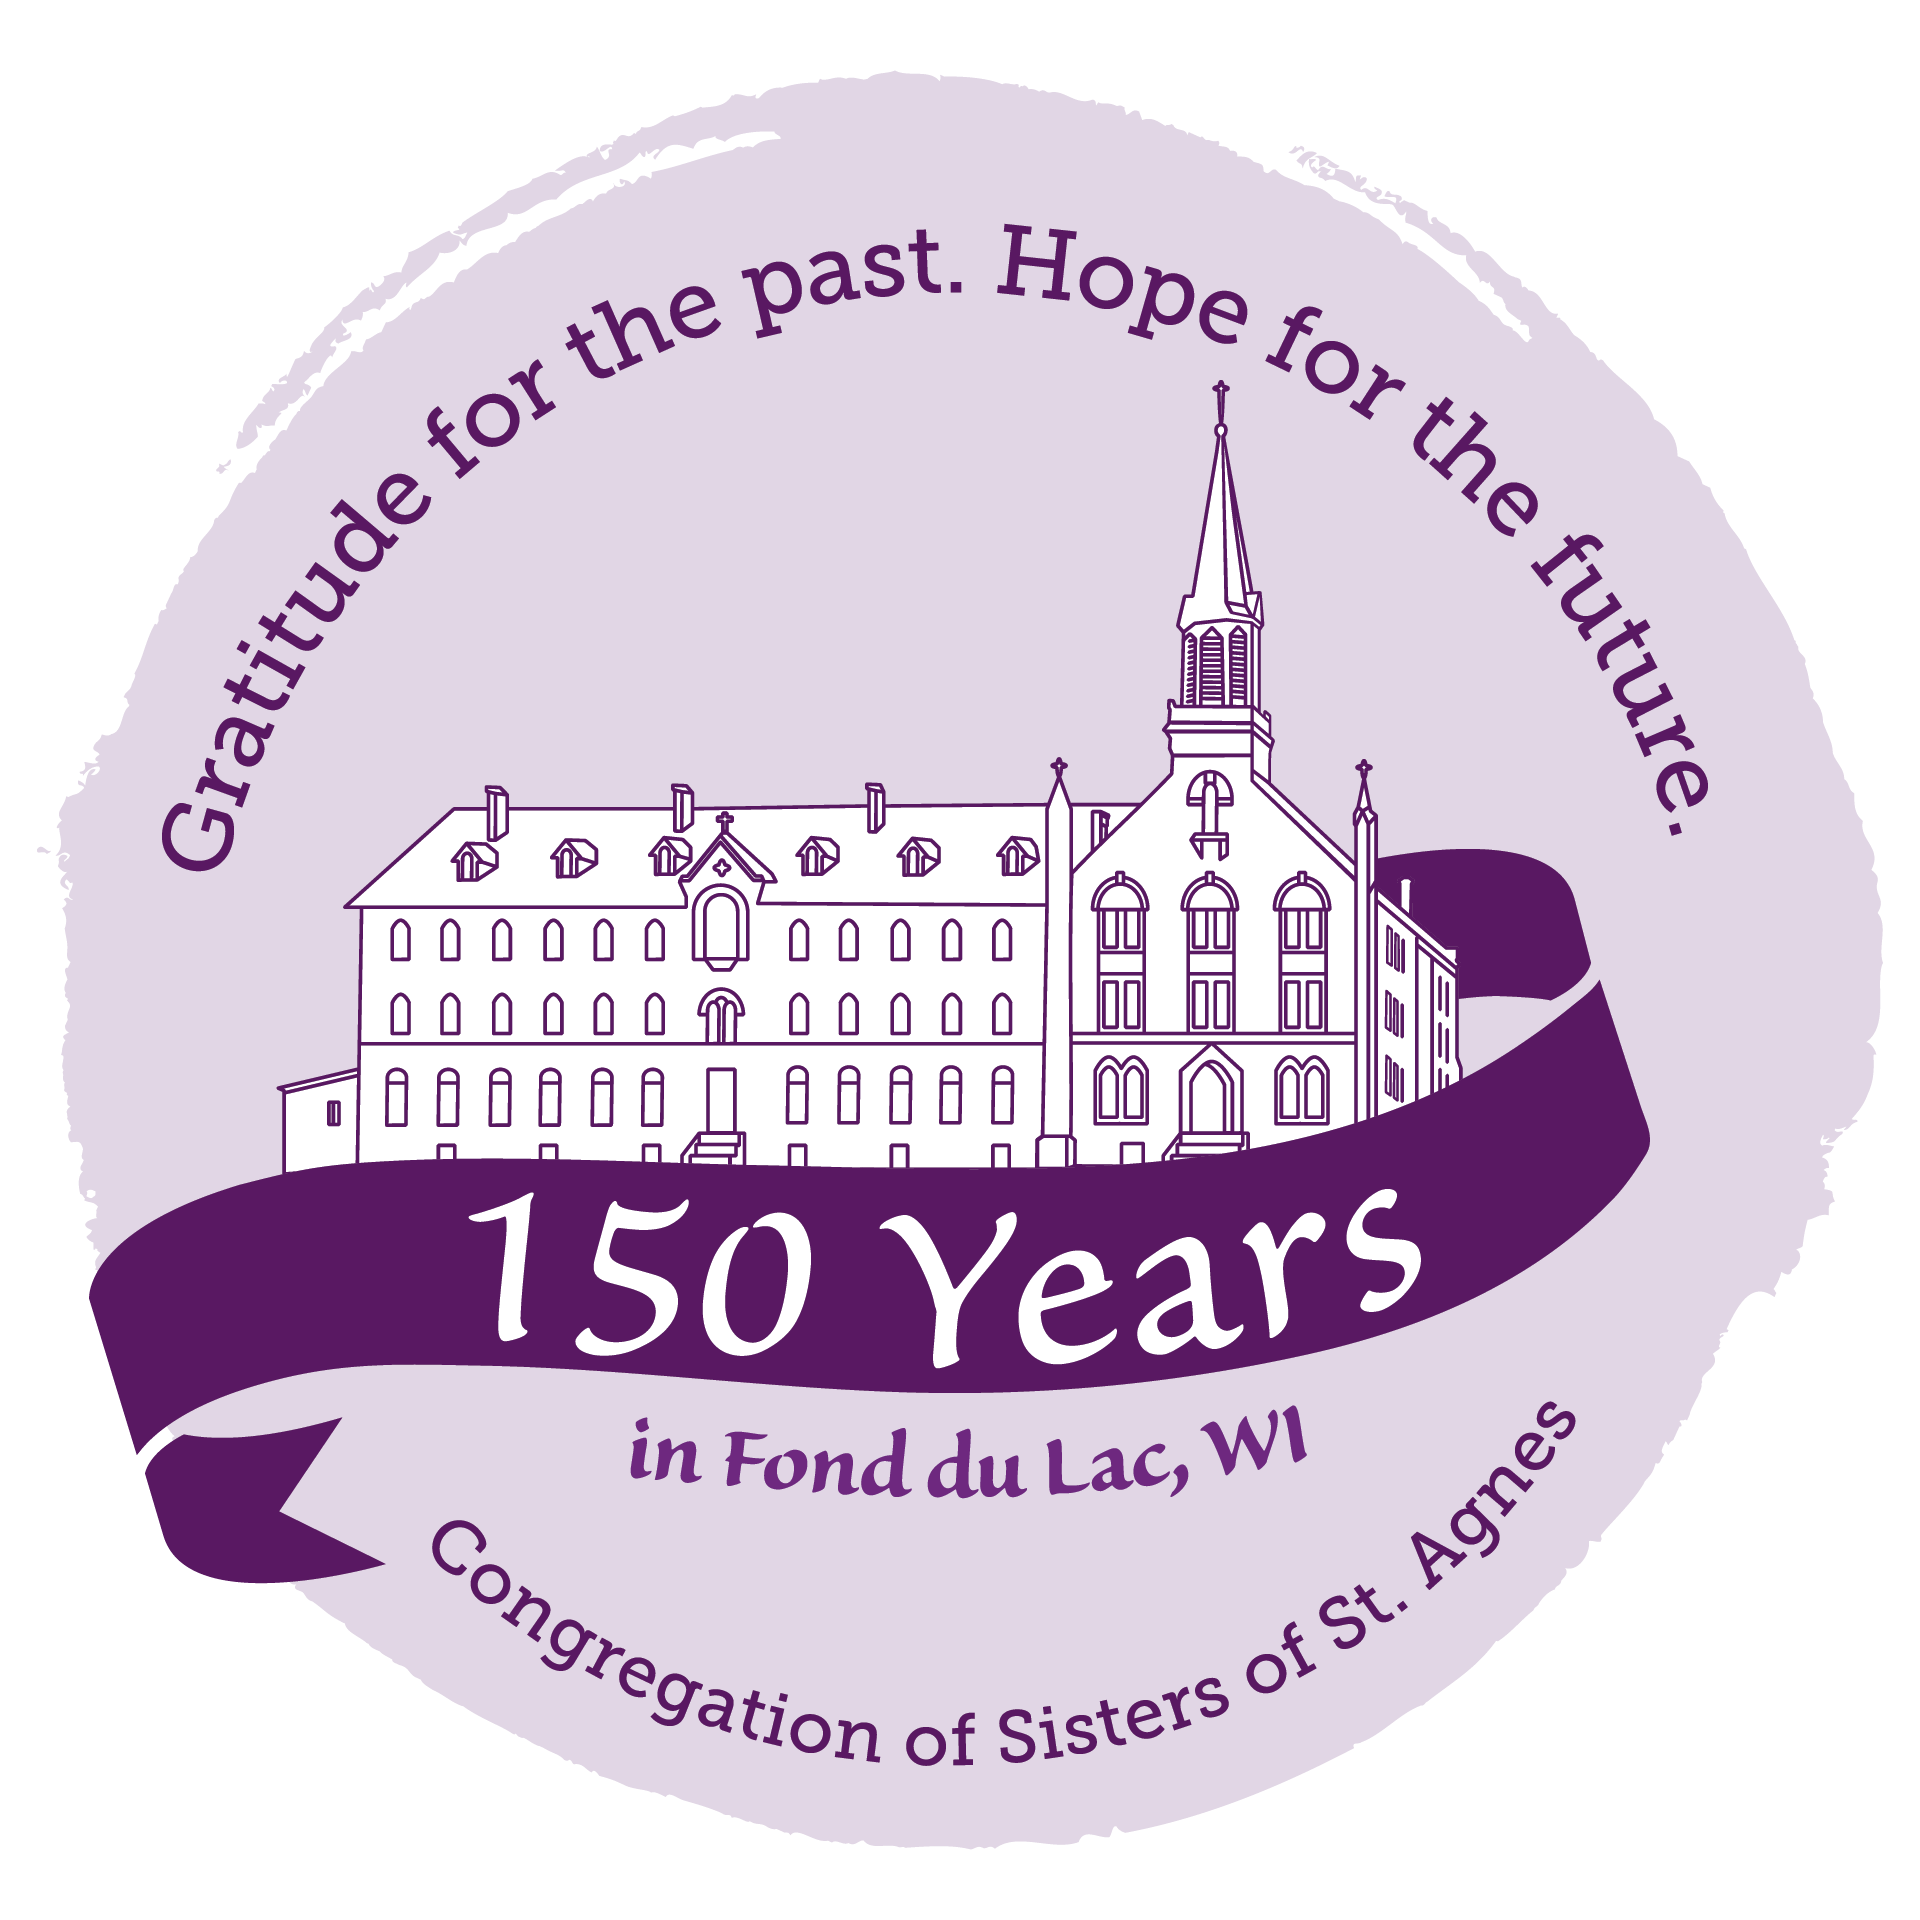 History at Home returns virtually with the history of the Sisters of St. Agnes